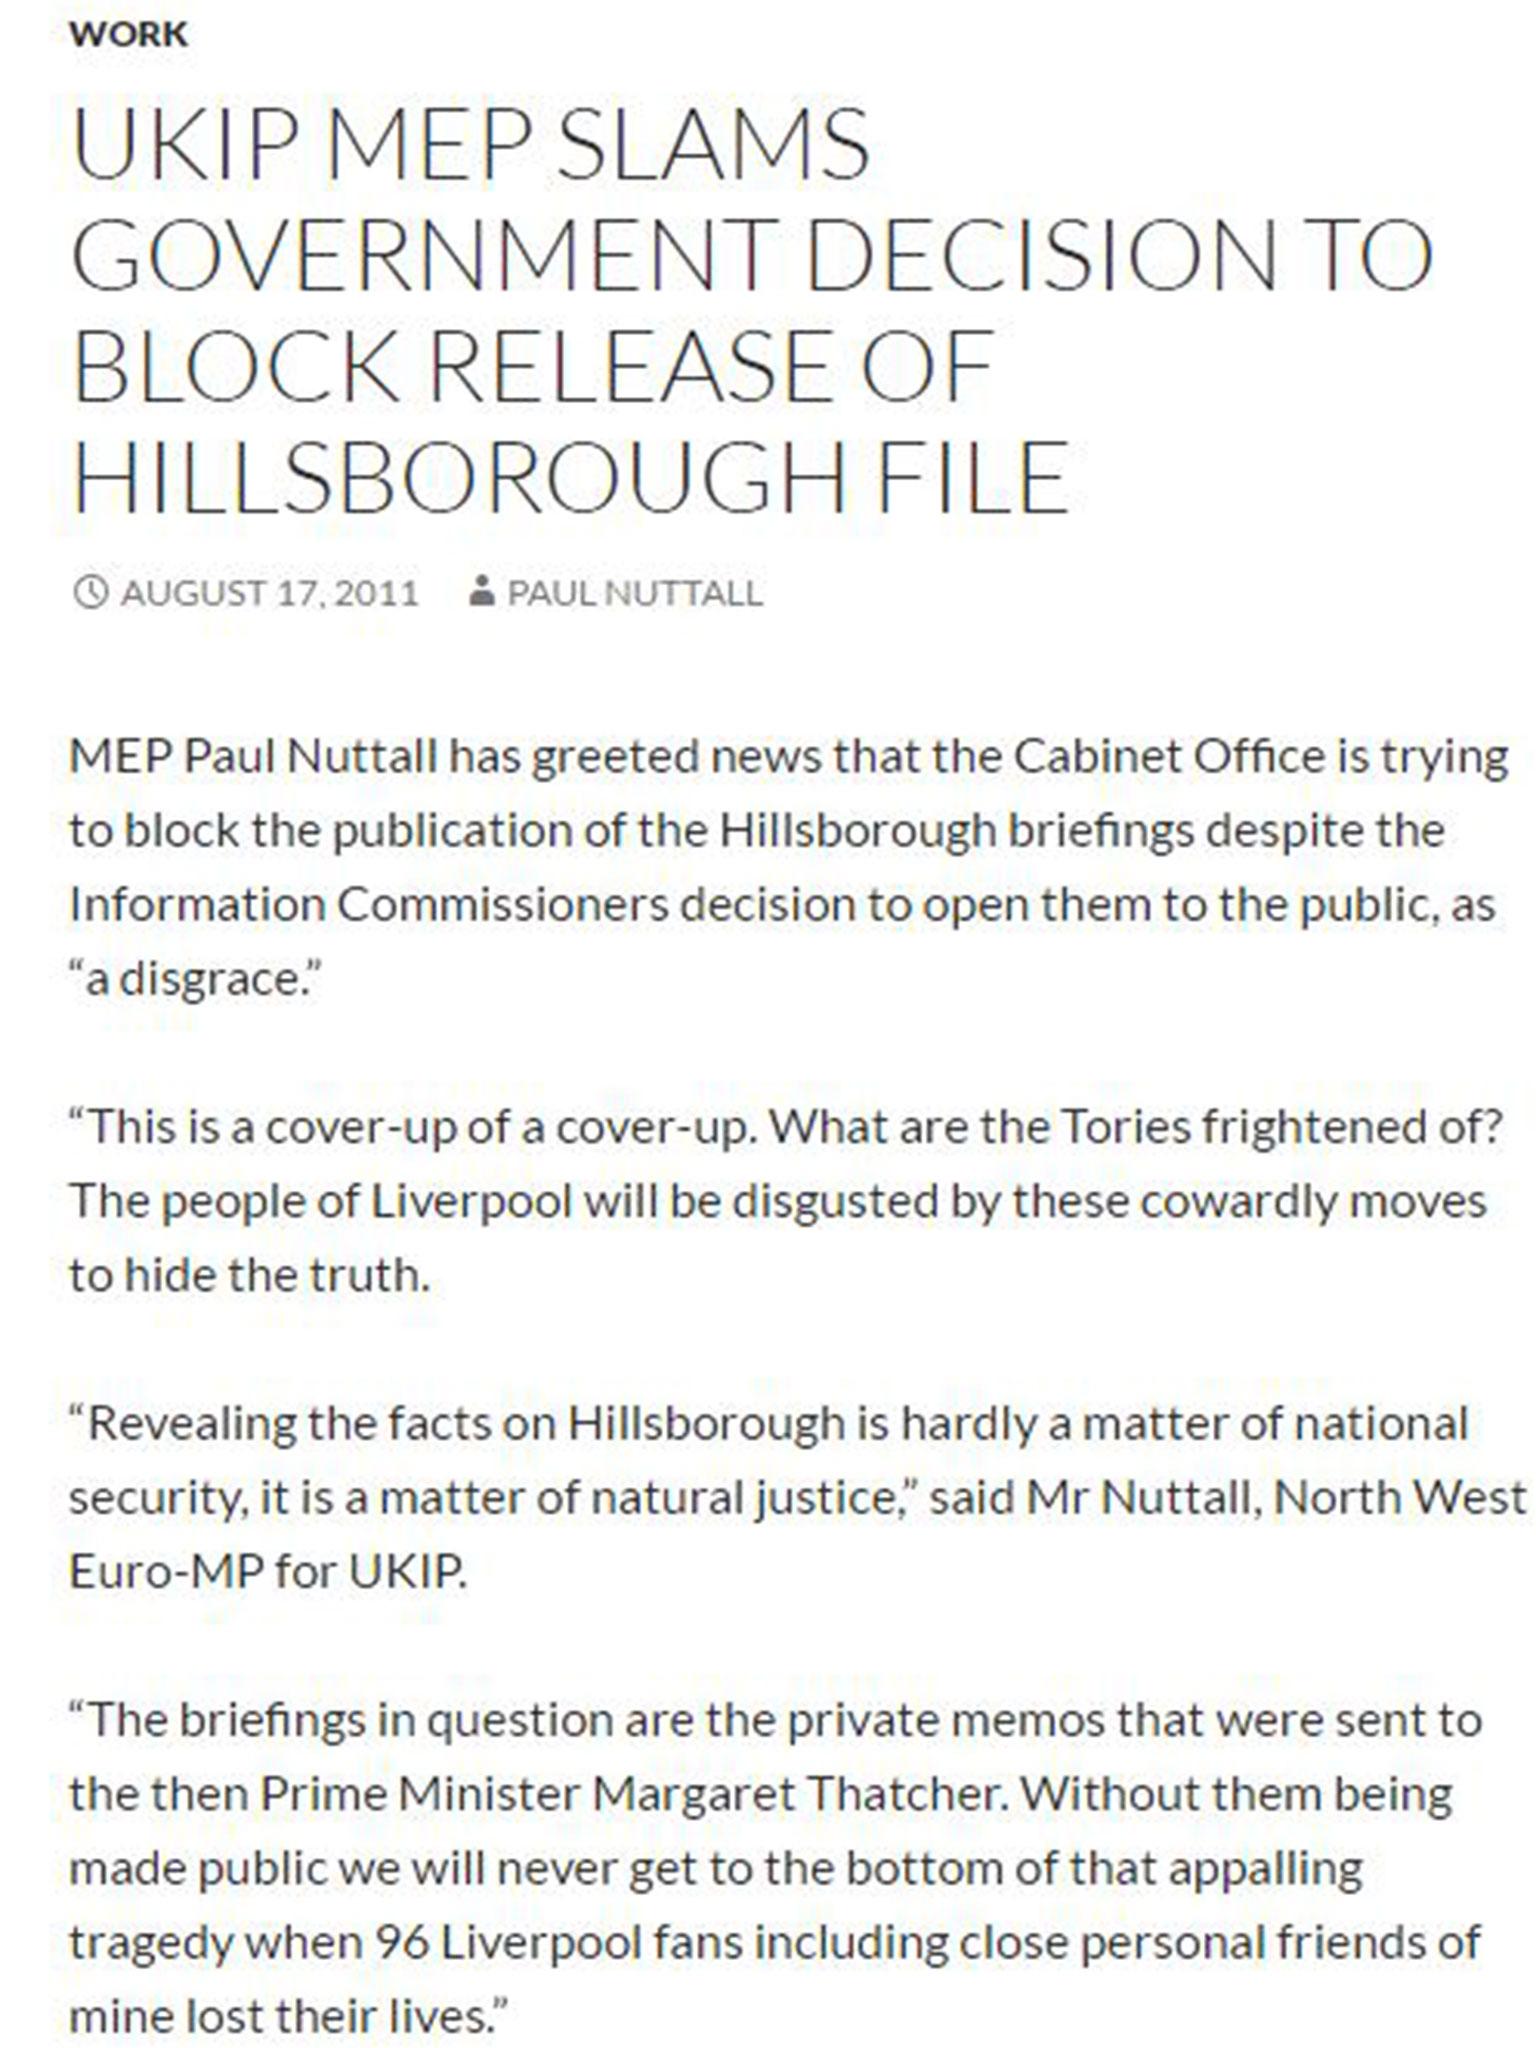 The claim as it appeared on Mr Nuttall's website, posted on 17 August, 2011